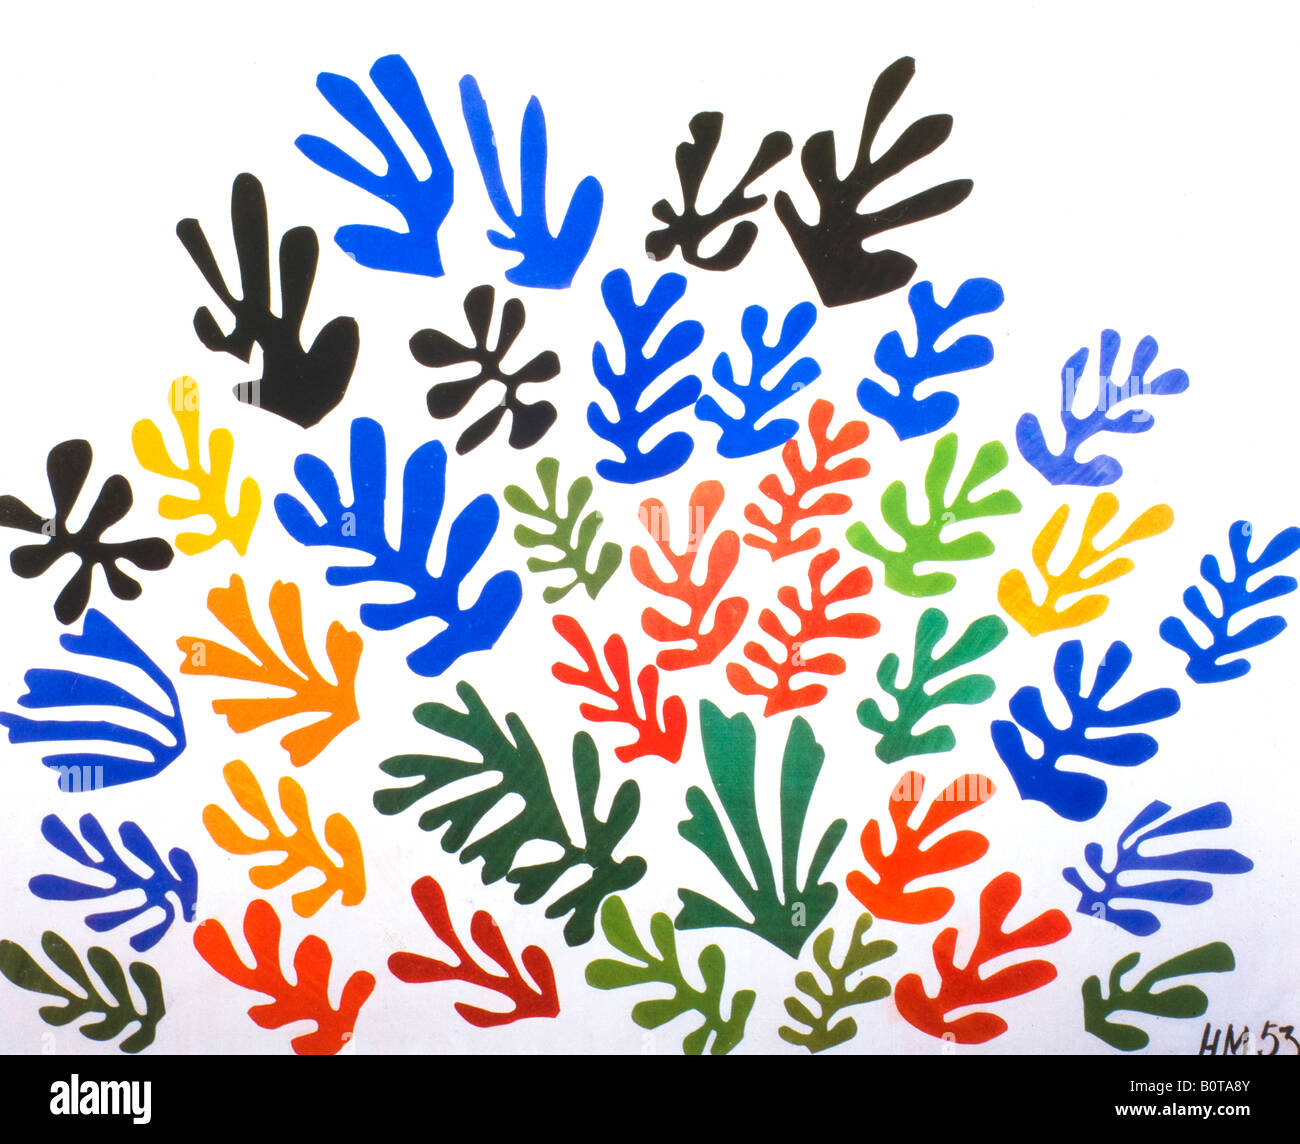 Spray of Leaves by Henri Matisse 1953 Stock Photo - Alamy